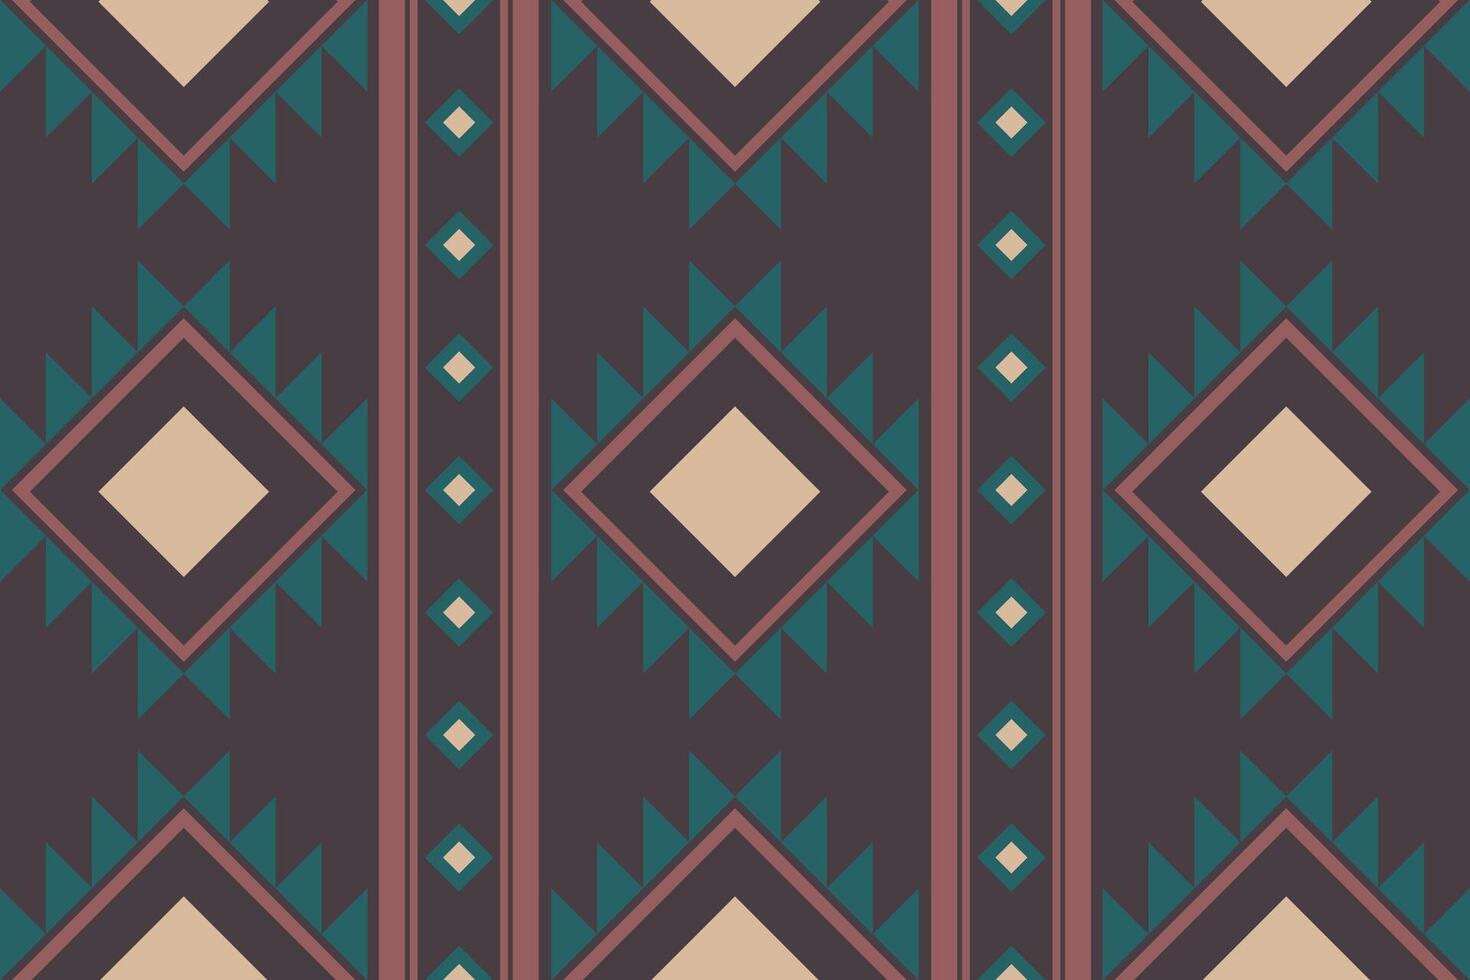 Geometric seamless ethnic pattern. Can be used in fabric design for cloth, fabric, carpet vector